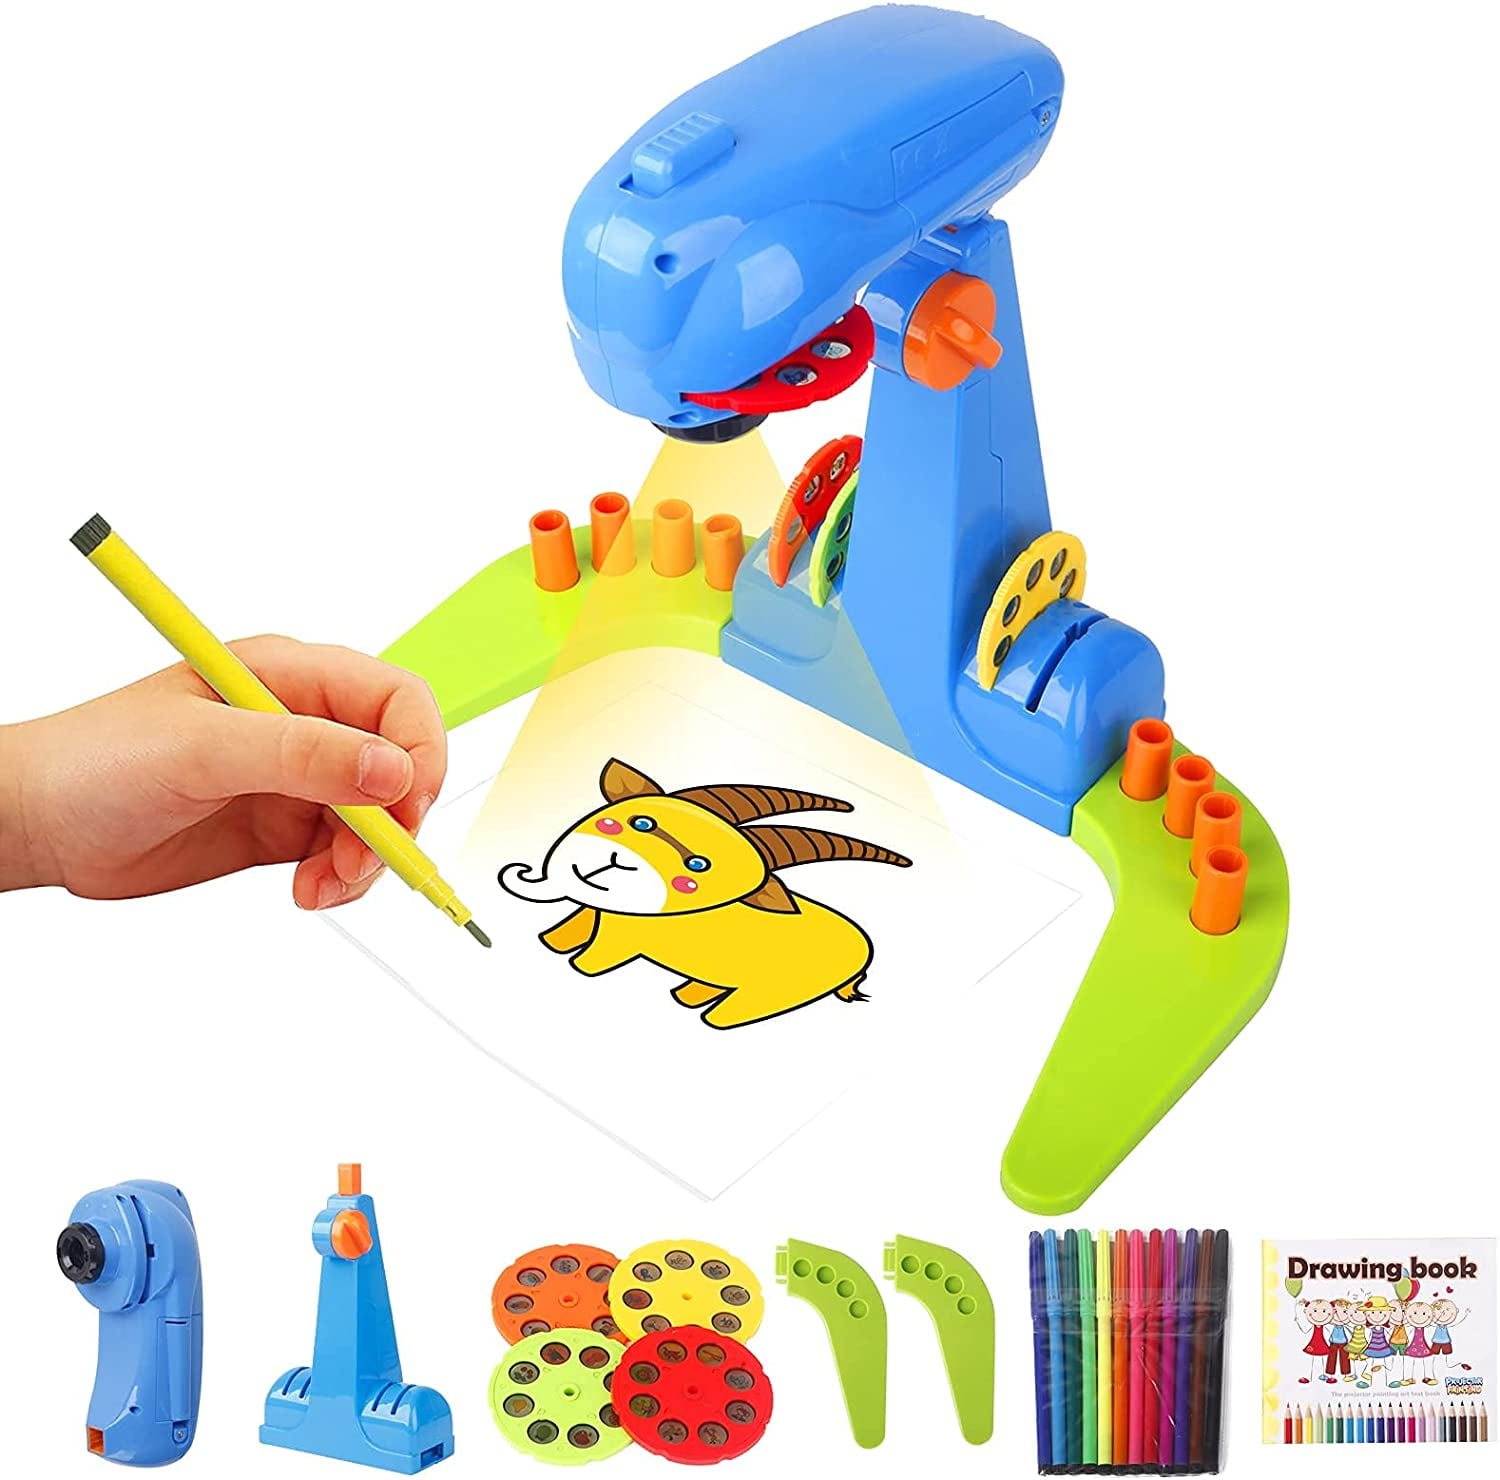 Fridja Drawing Projector for Kids, Learning Art Child Smart